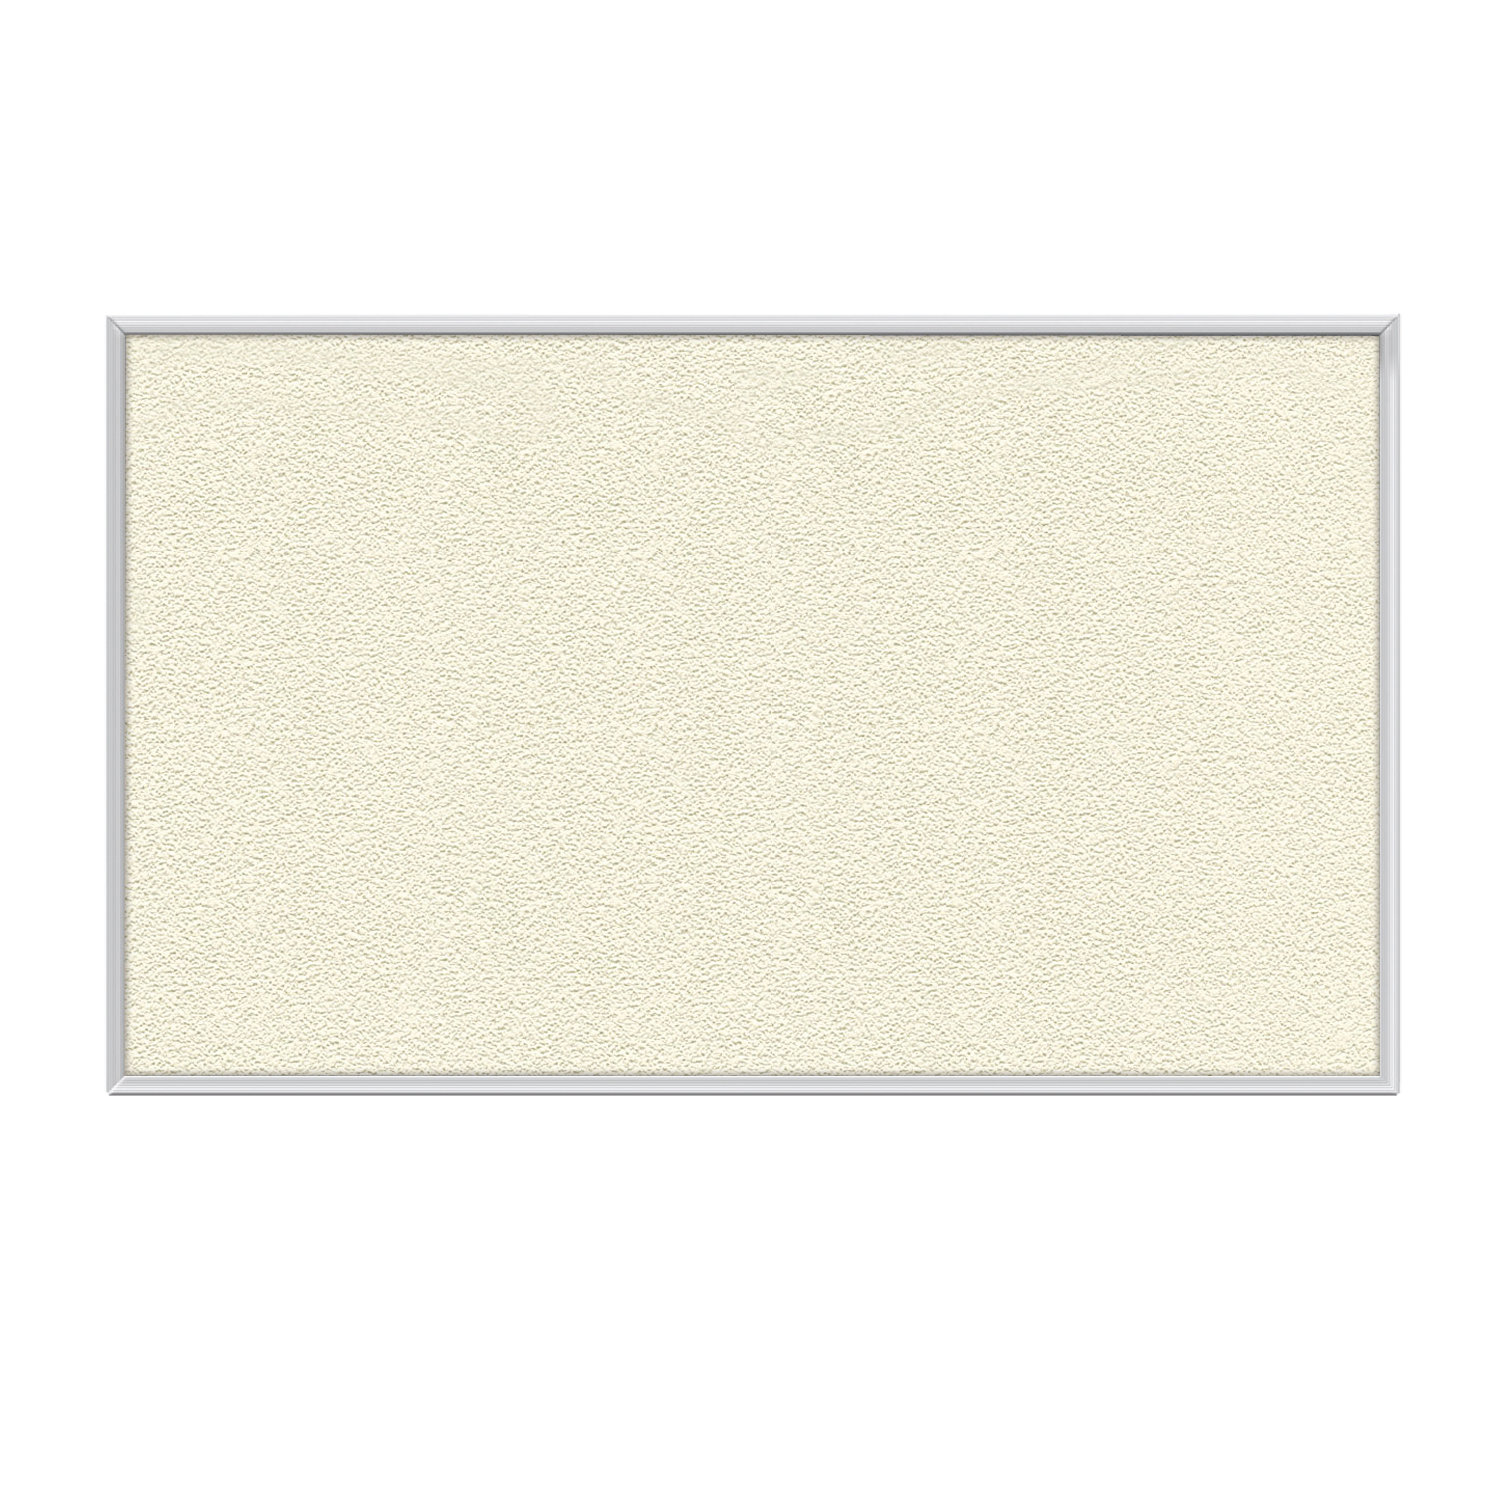 Post-it Sticky Cork Board, 22 x 36, Black and Gray, Includes Command  Fasteners, 1 Each (Quantity) 